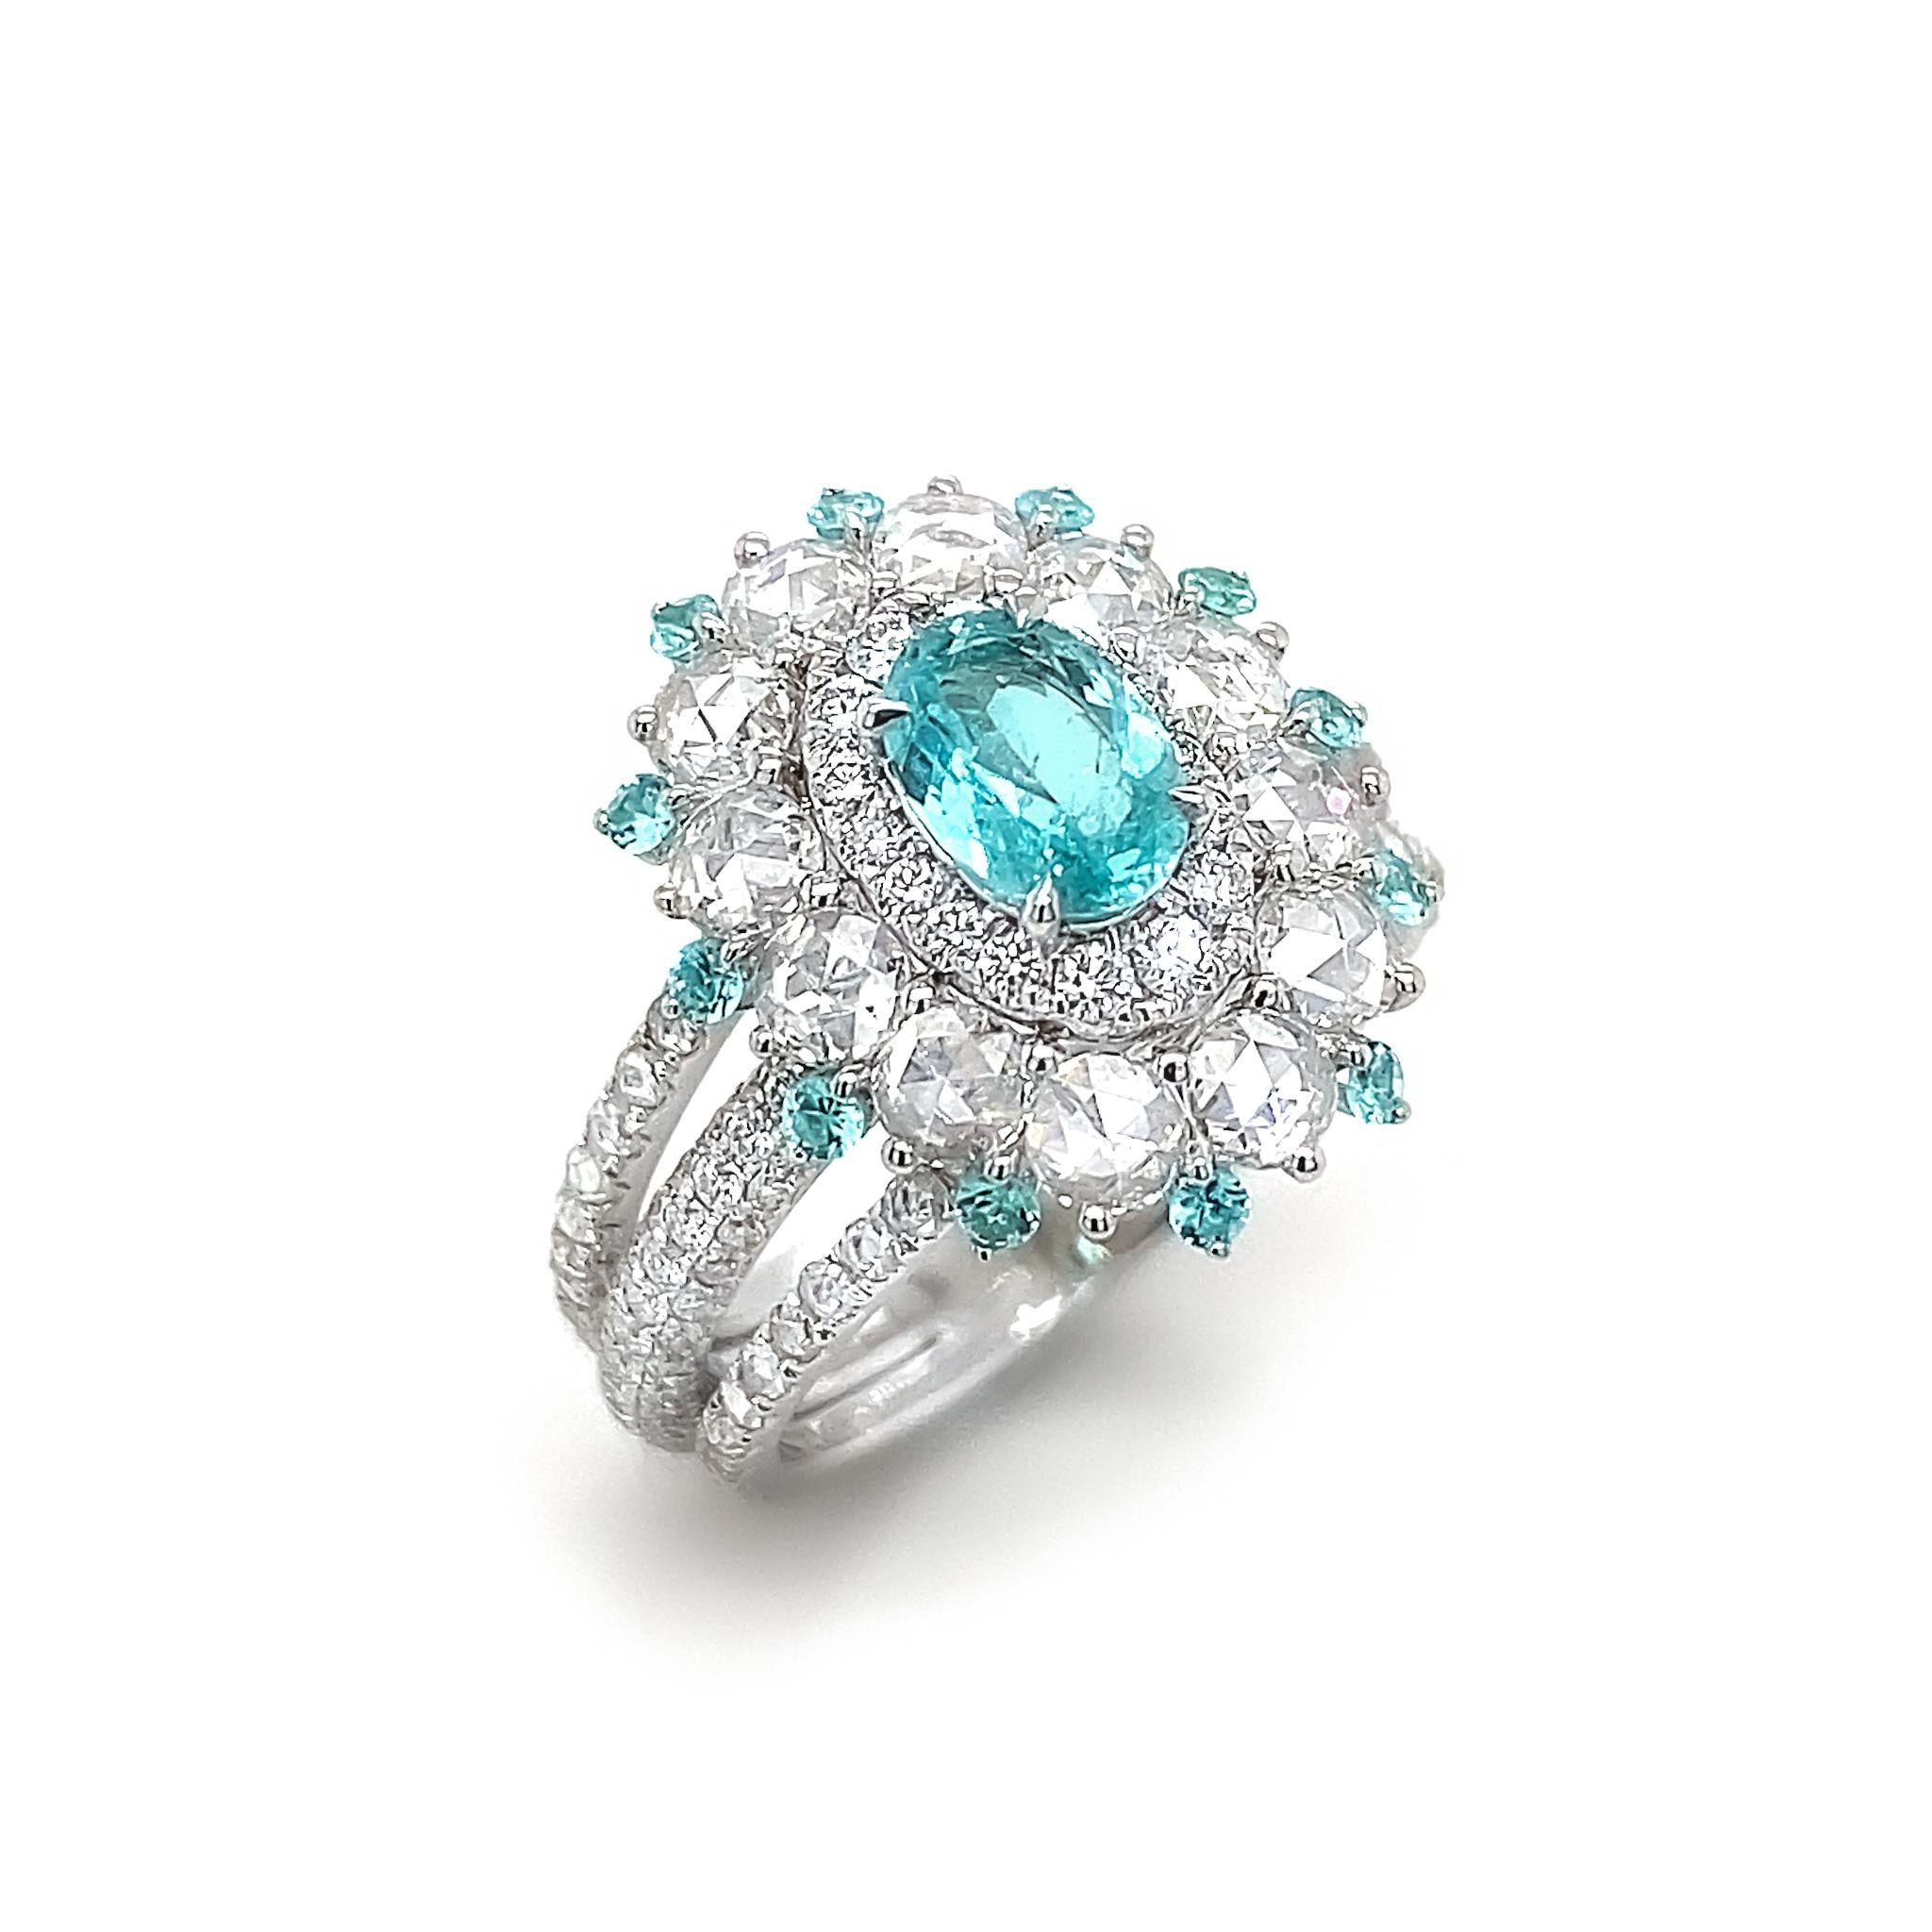 The prized Brazilian Paraiba ring set in an exquisite, timeless design by Dilys' – the well-known connoisseur of coloured gems – in 18K White Gold.

1 ICA Certified Brazilian Paraiba, totalling 0.49ct 
12 Round Brazilian Paraiba, totalling 0.15ct
12